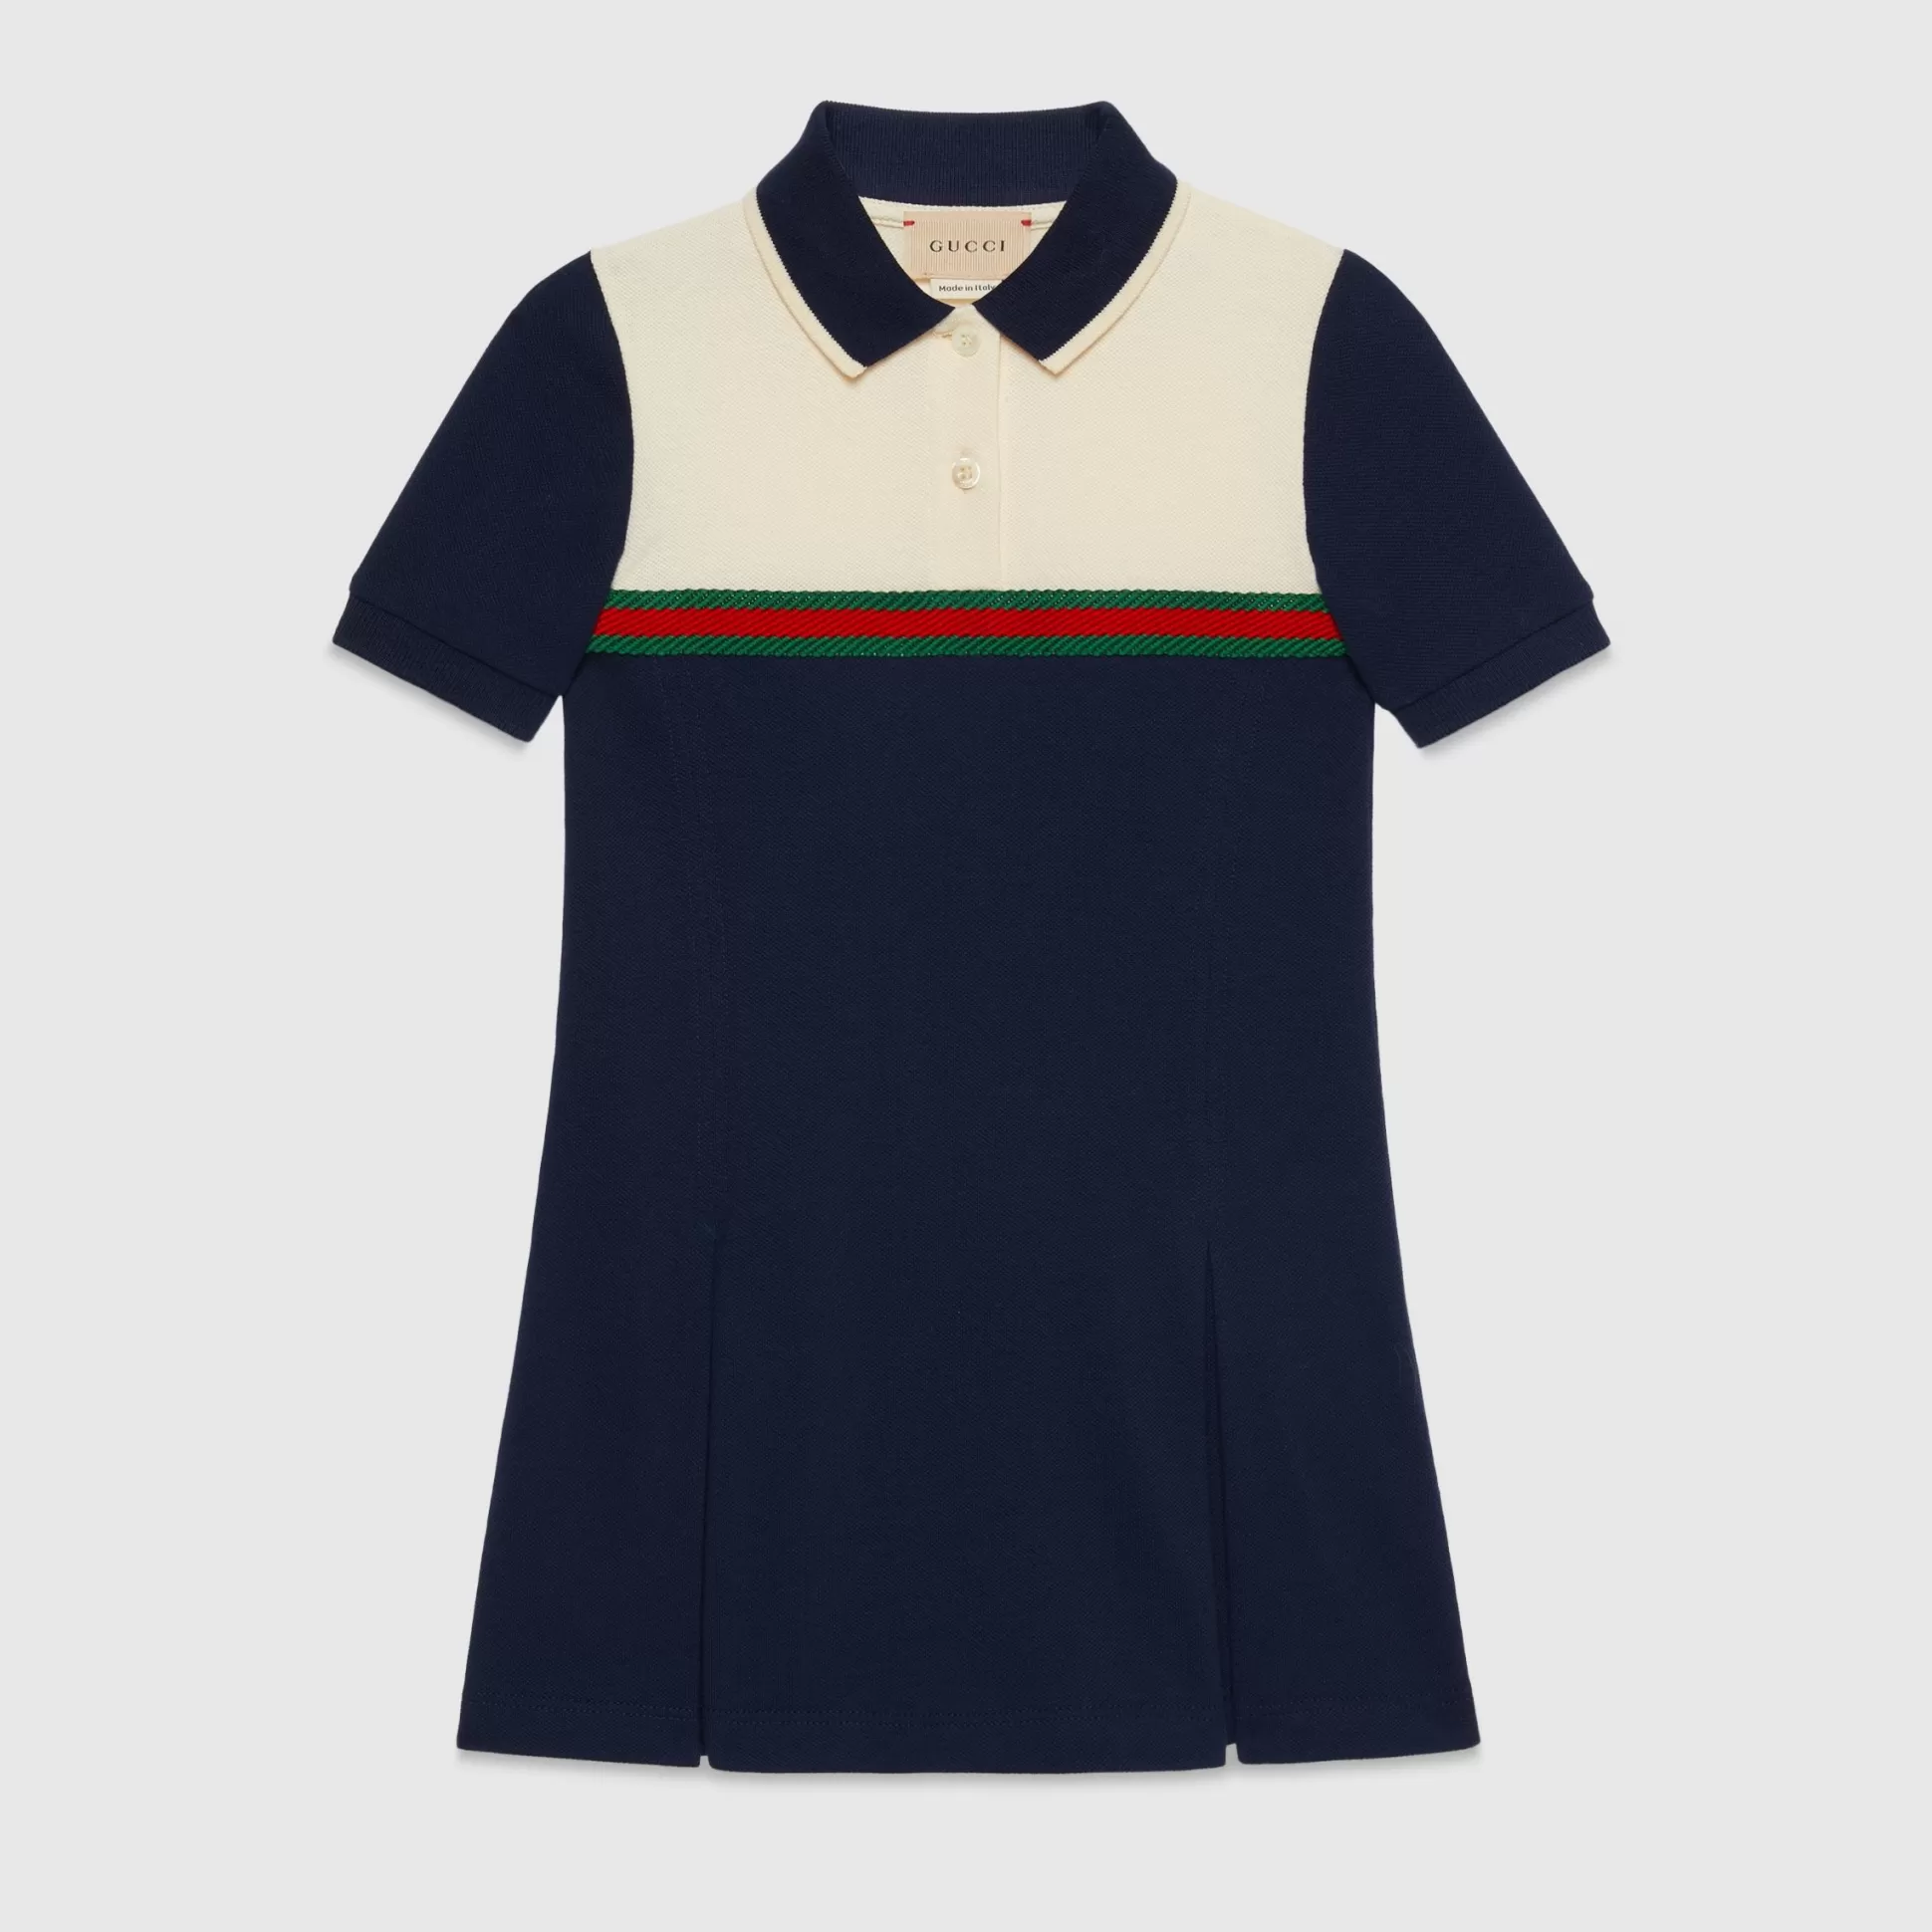 GUCCI Children'S Cotton Dress With Web-Children Clothing (4-12 Years)